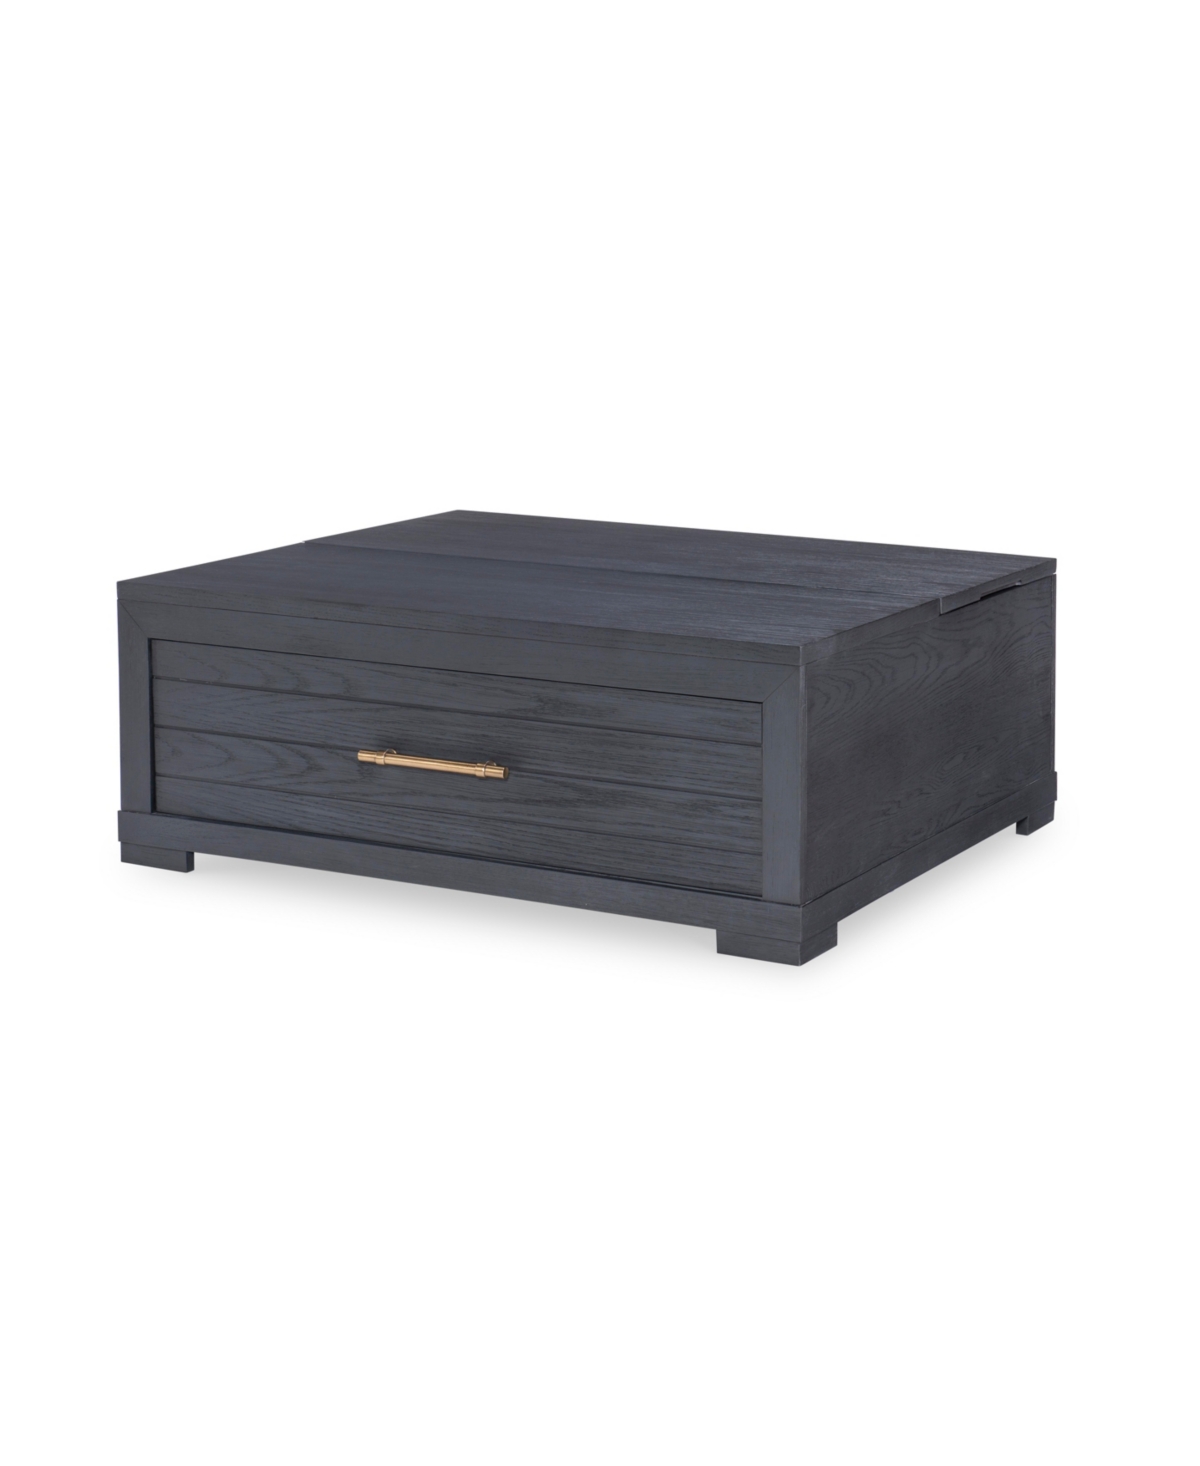 Furniture Westwood Lift Top Cocktail Table In Charred Oak